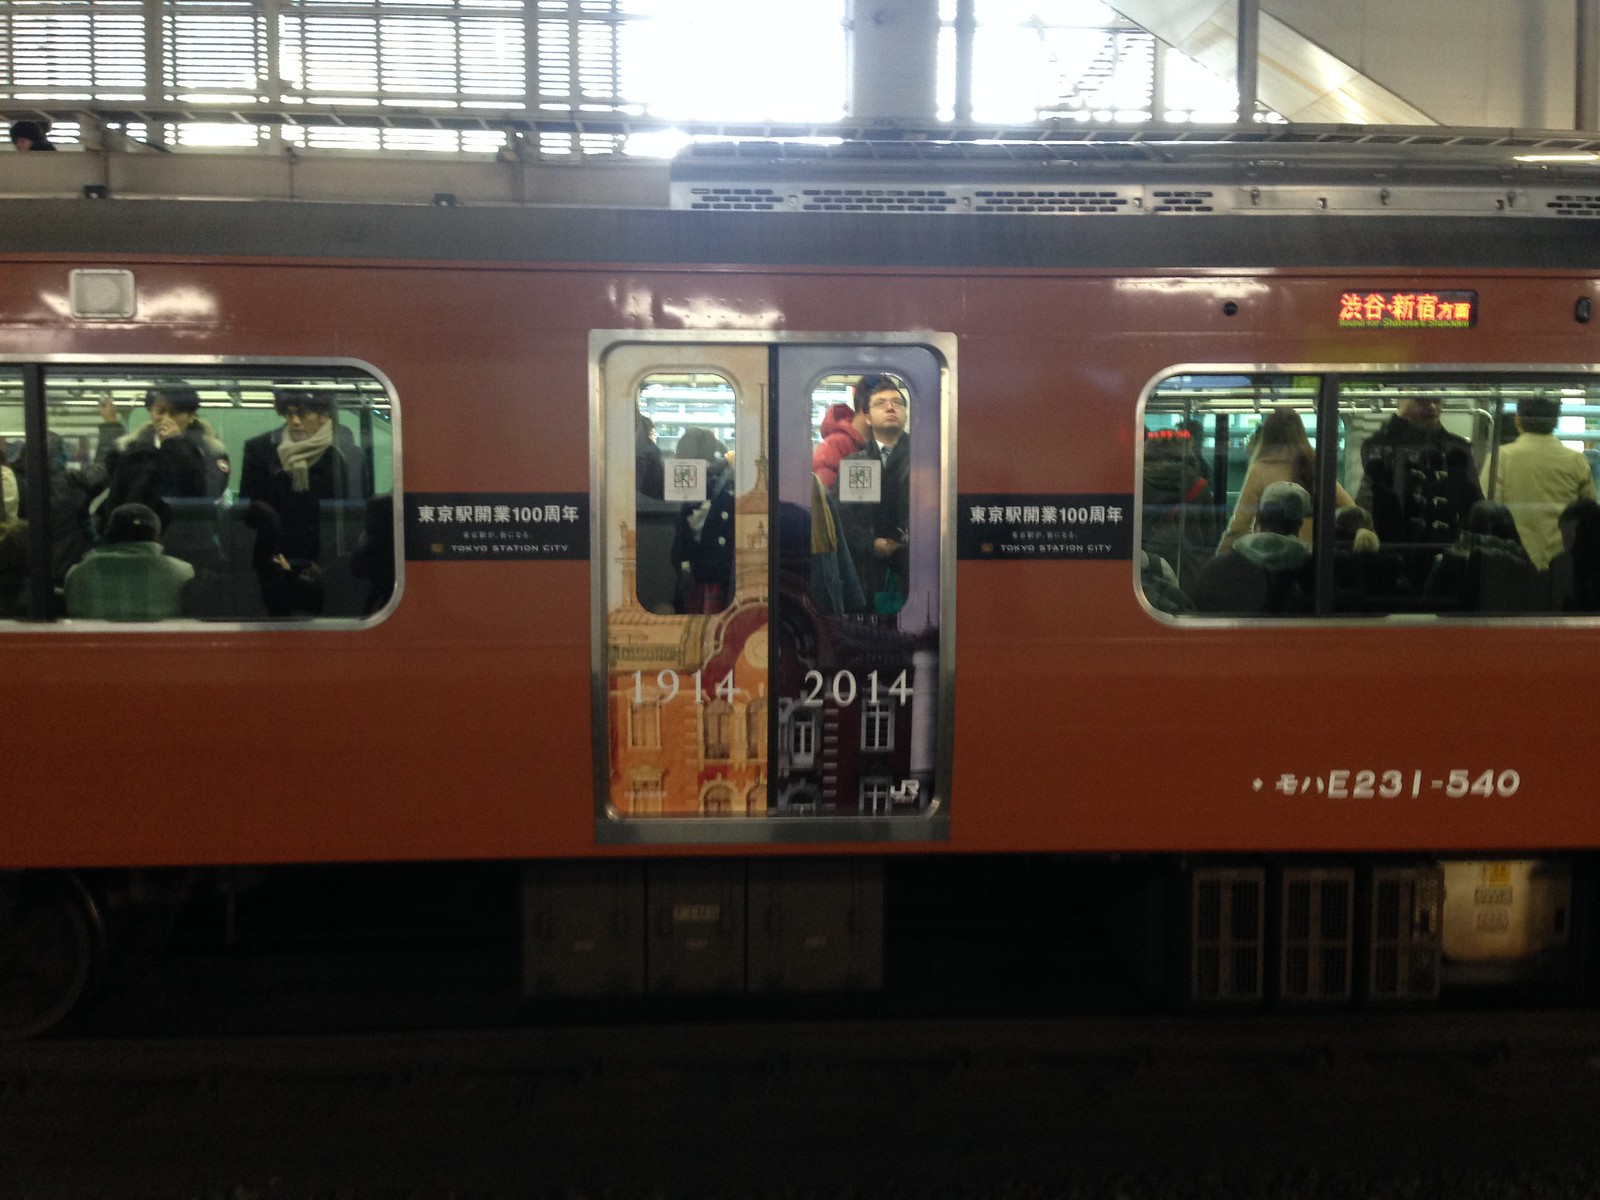 Brown color Yamanote Line in Tokyo